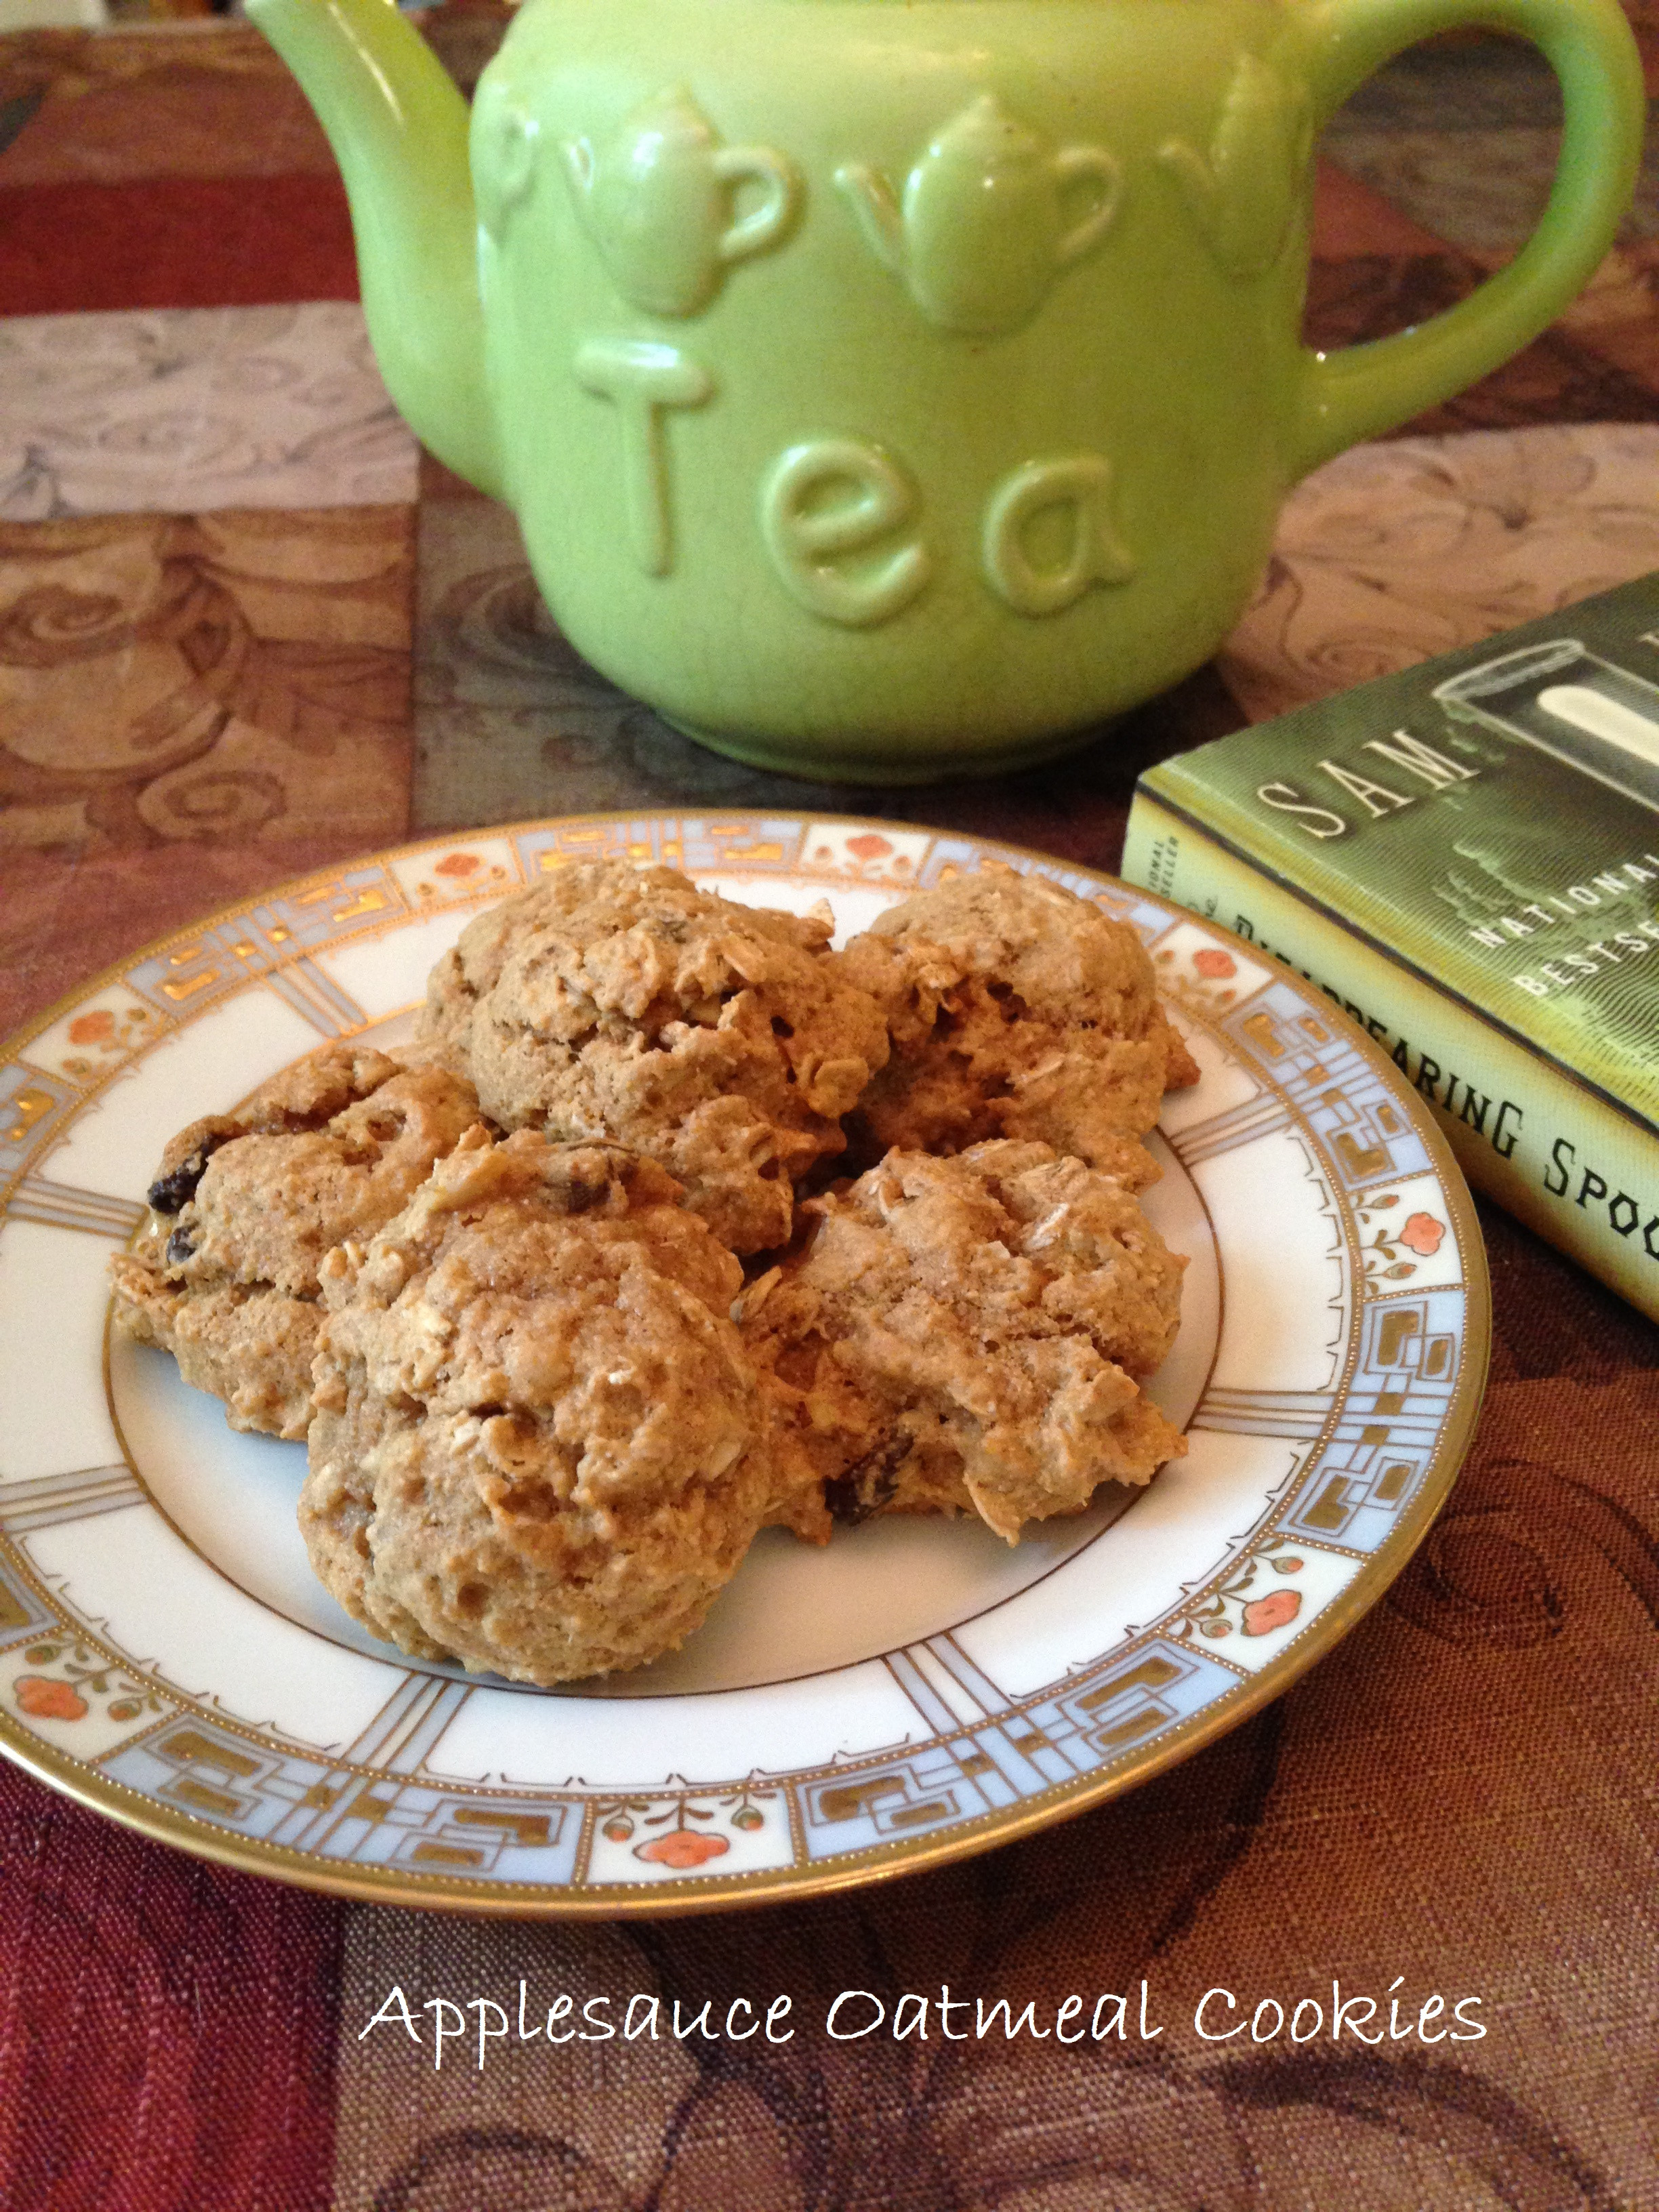 Low Fat Oatmeal Cookies With Applesauce
 Healthier Cookie Choices for National Cookie Day Medical